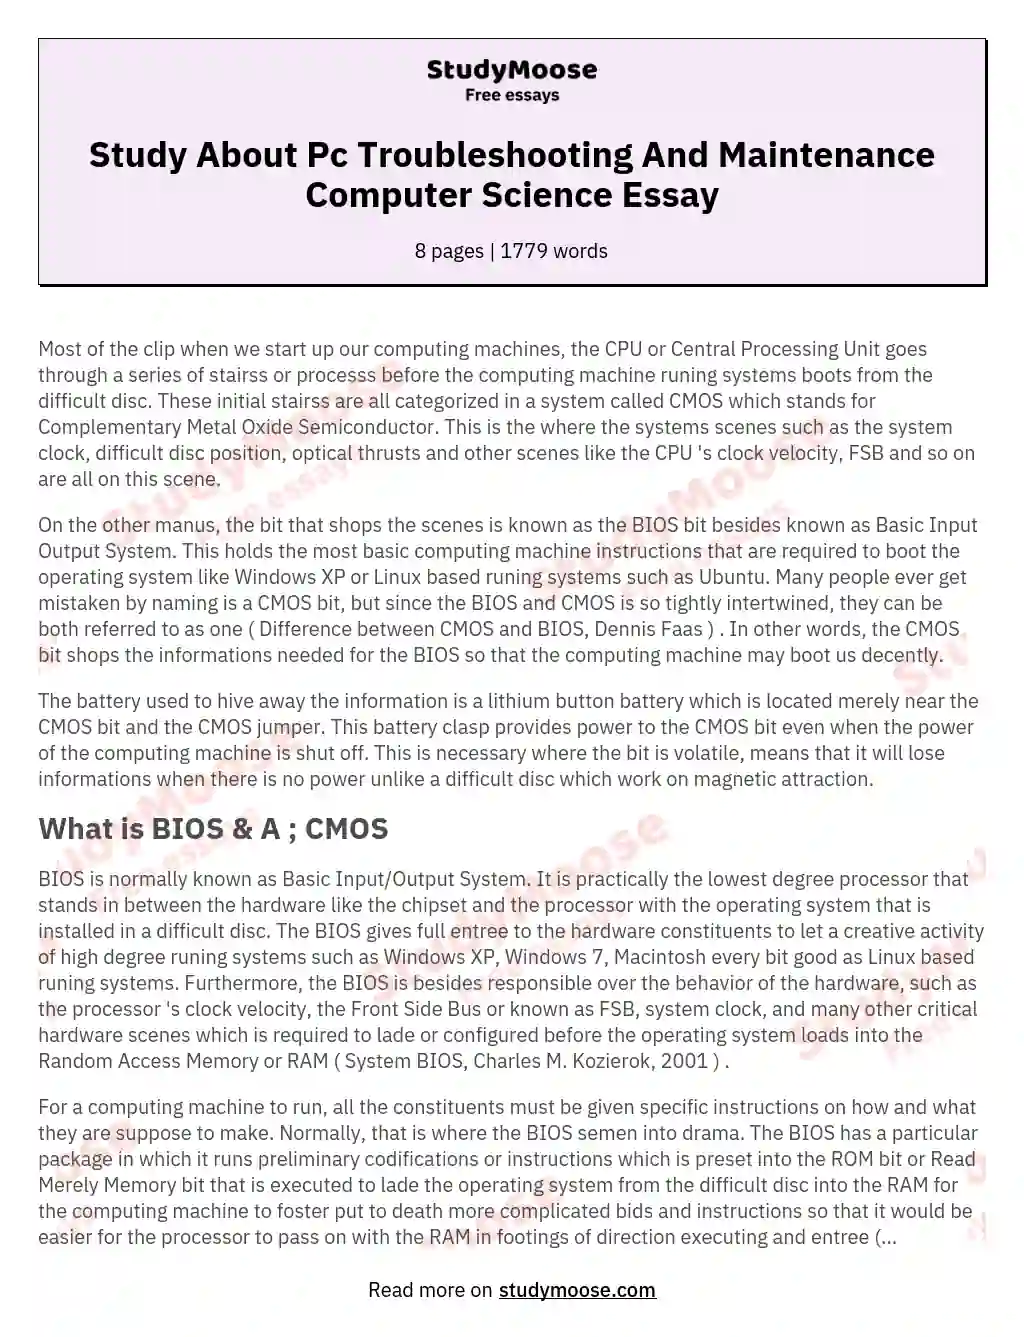 Study About Pc Troubleshooting And Maintenance Computer Science Essay essay